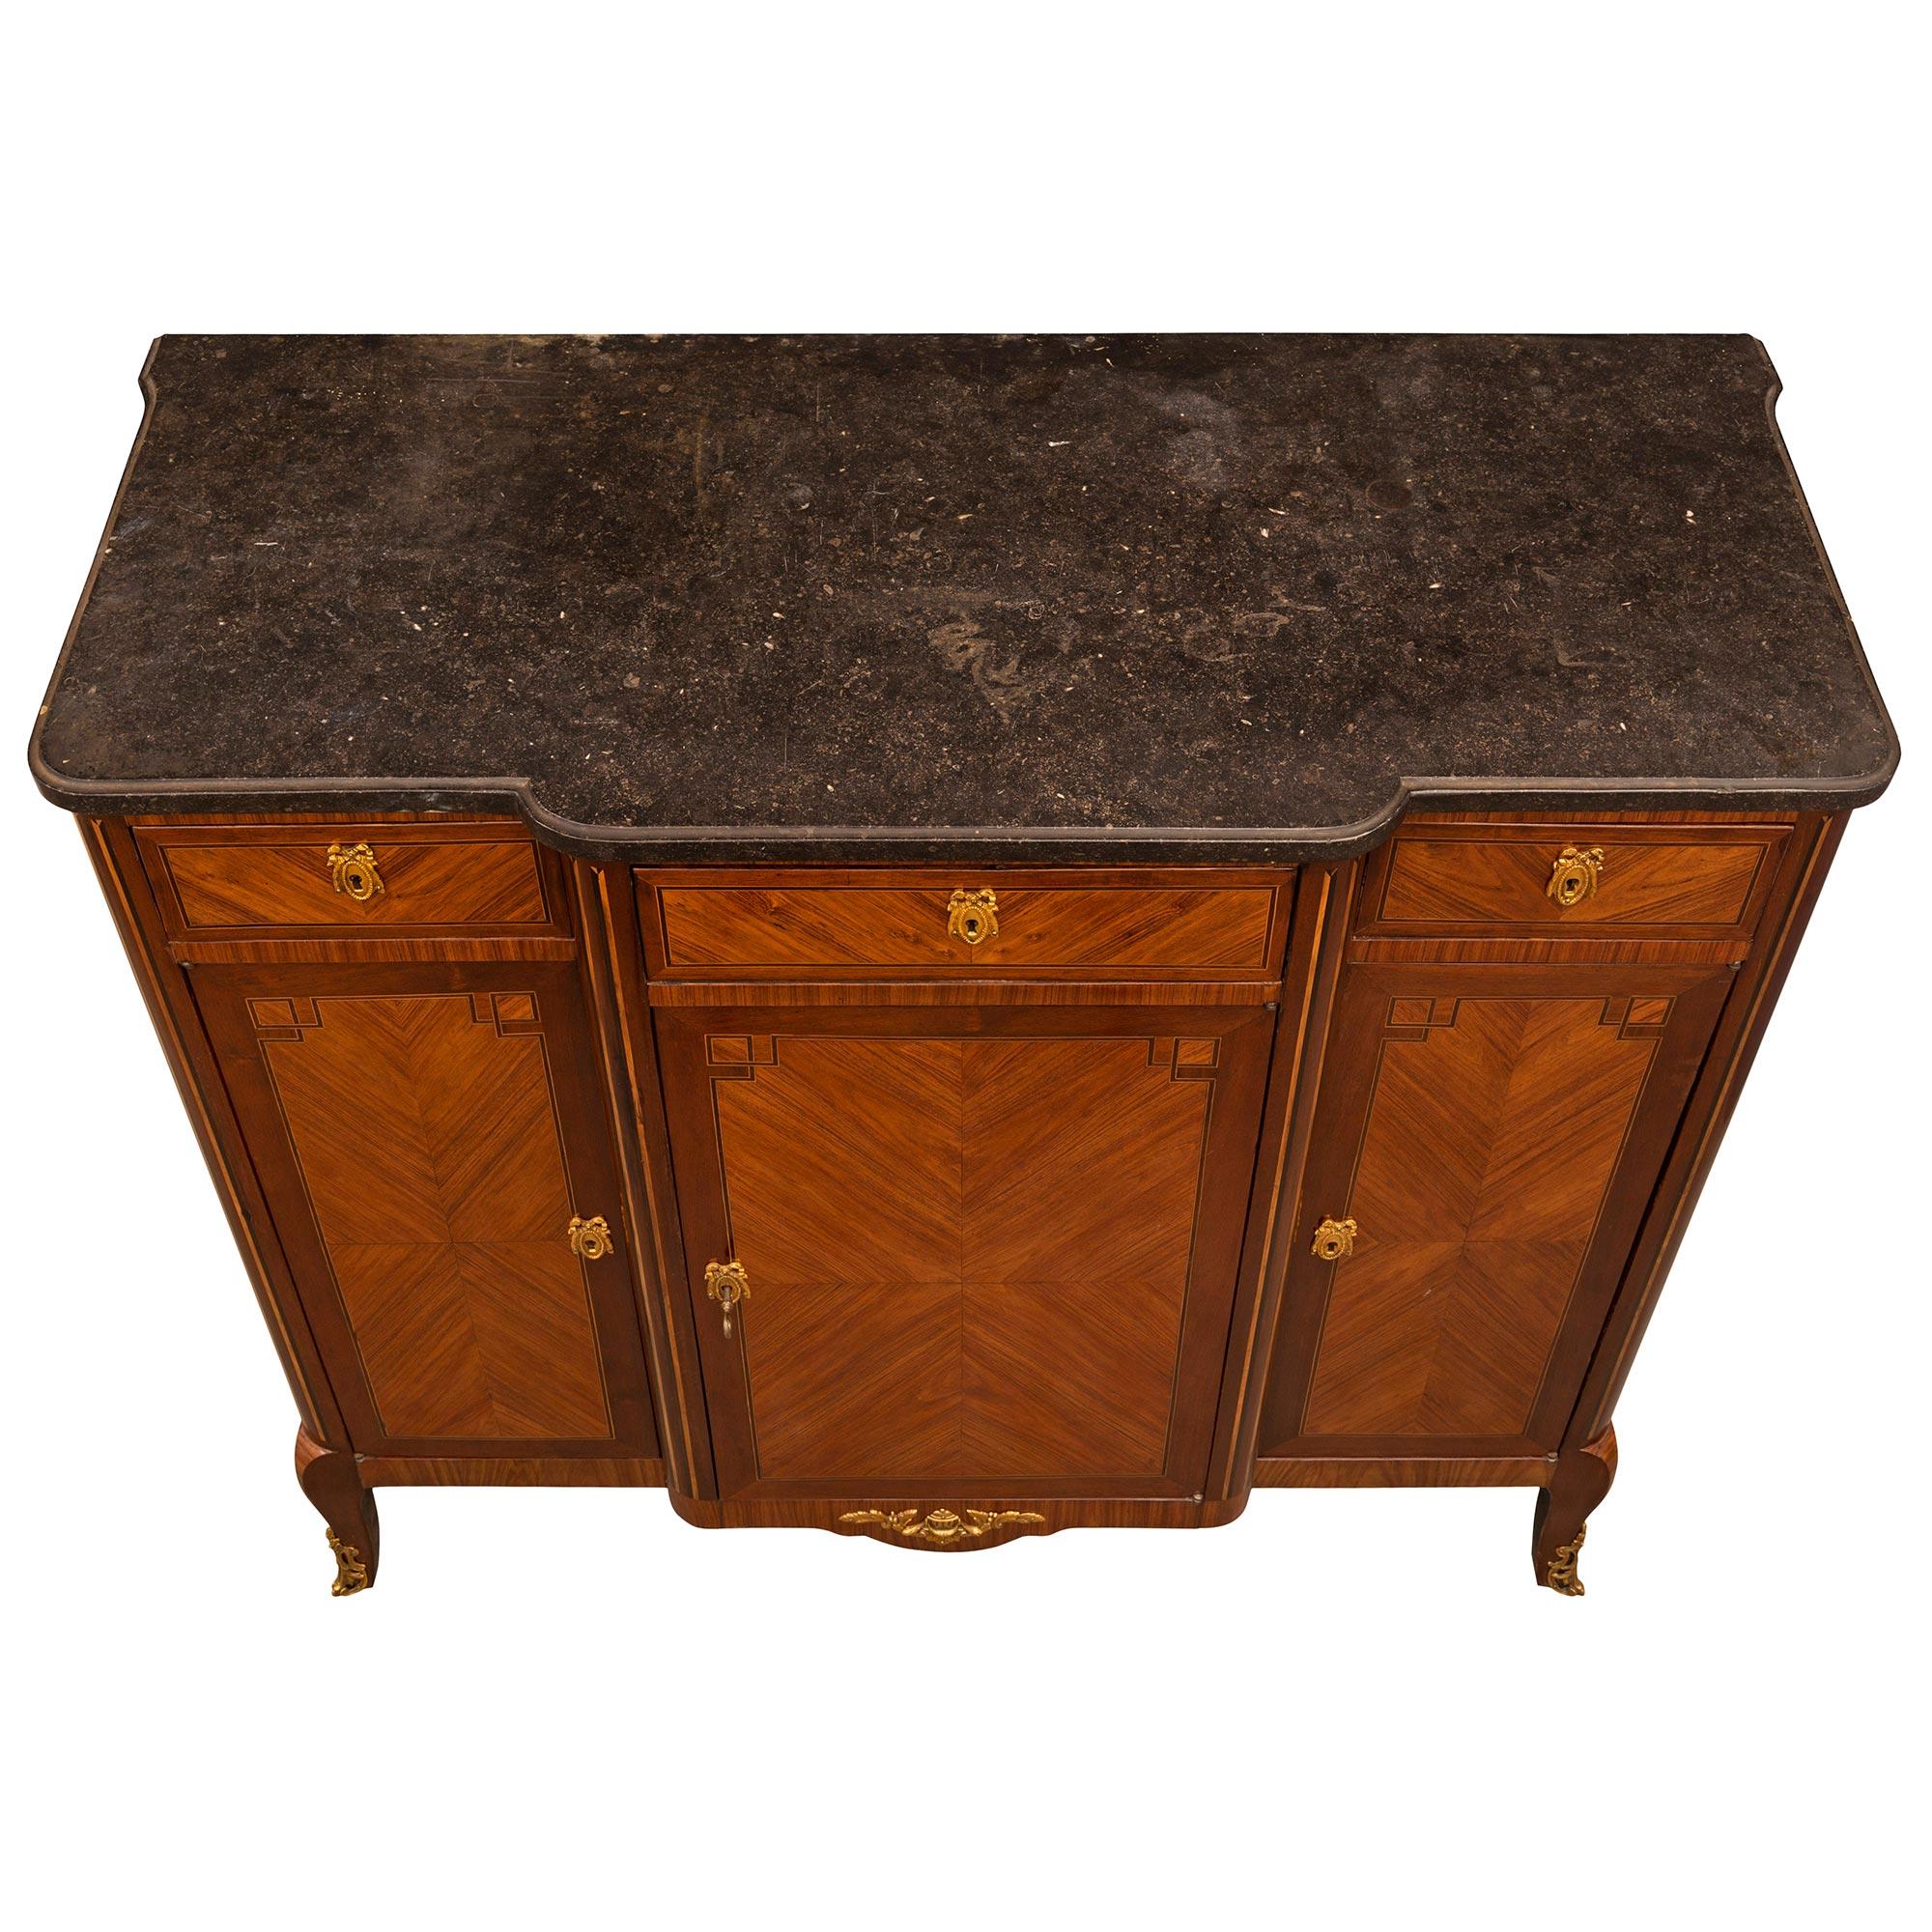 An elegant French 19th century Transitional st. Tulipwood, Kingwood, ormolu, and Black Belgian marble buffet. The three door three drawer buffet is raised by cabriole legs with fine pierced foliate ormolu sabots below the frieze which is centered by